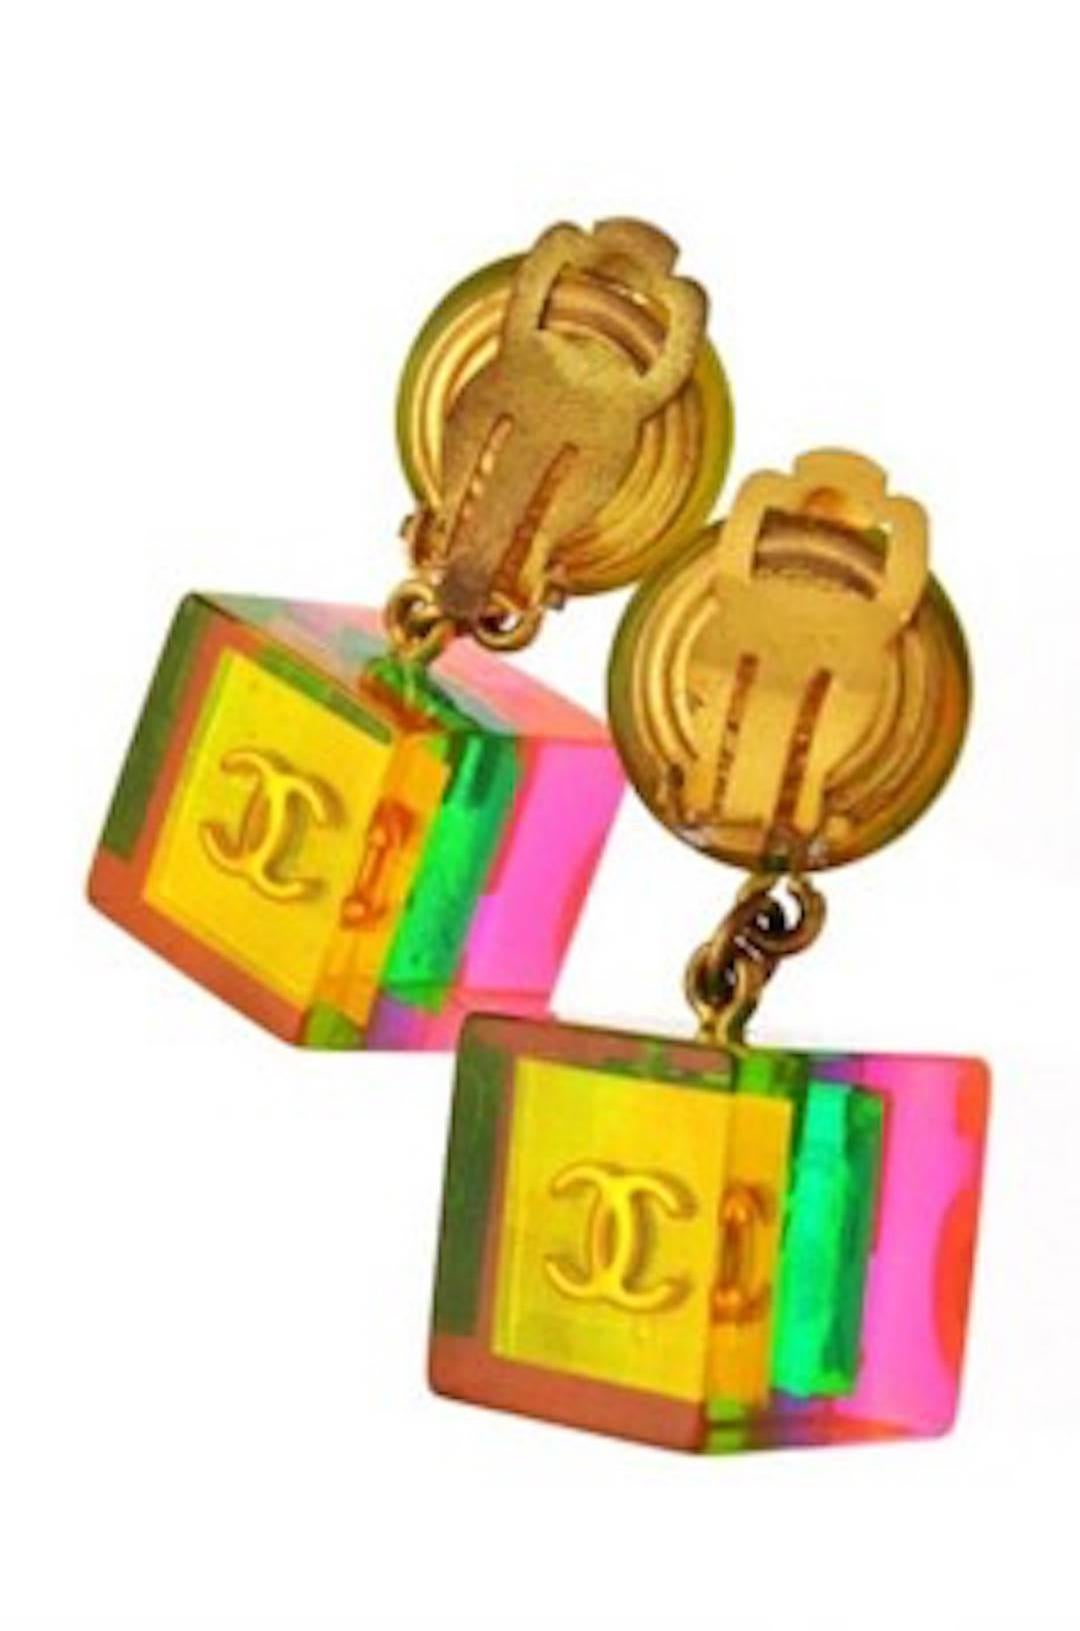 CURATOR'S NOTES

YOWZA!  PRICE REDUCED THIS WEEKEND ONLY!

Turn heads this summer with these rare, statement Chanel No. 5 cube multi-color earrings!  Featuring gold tone and chic pink, green and yellow colorblocking, these beauties are sure to